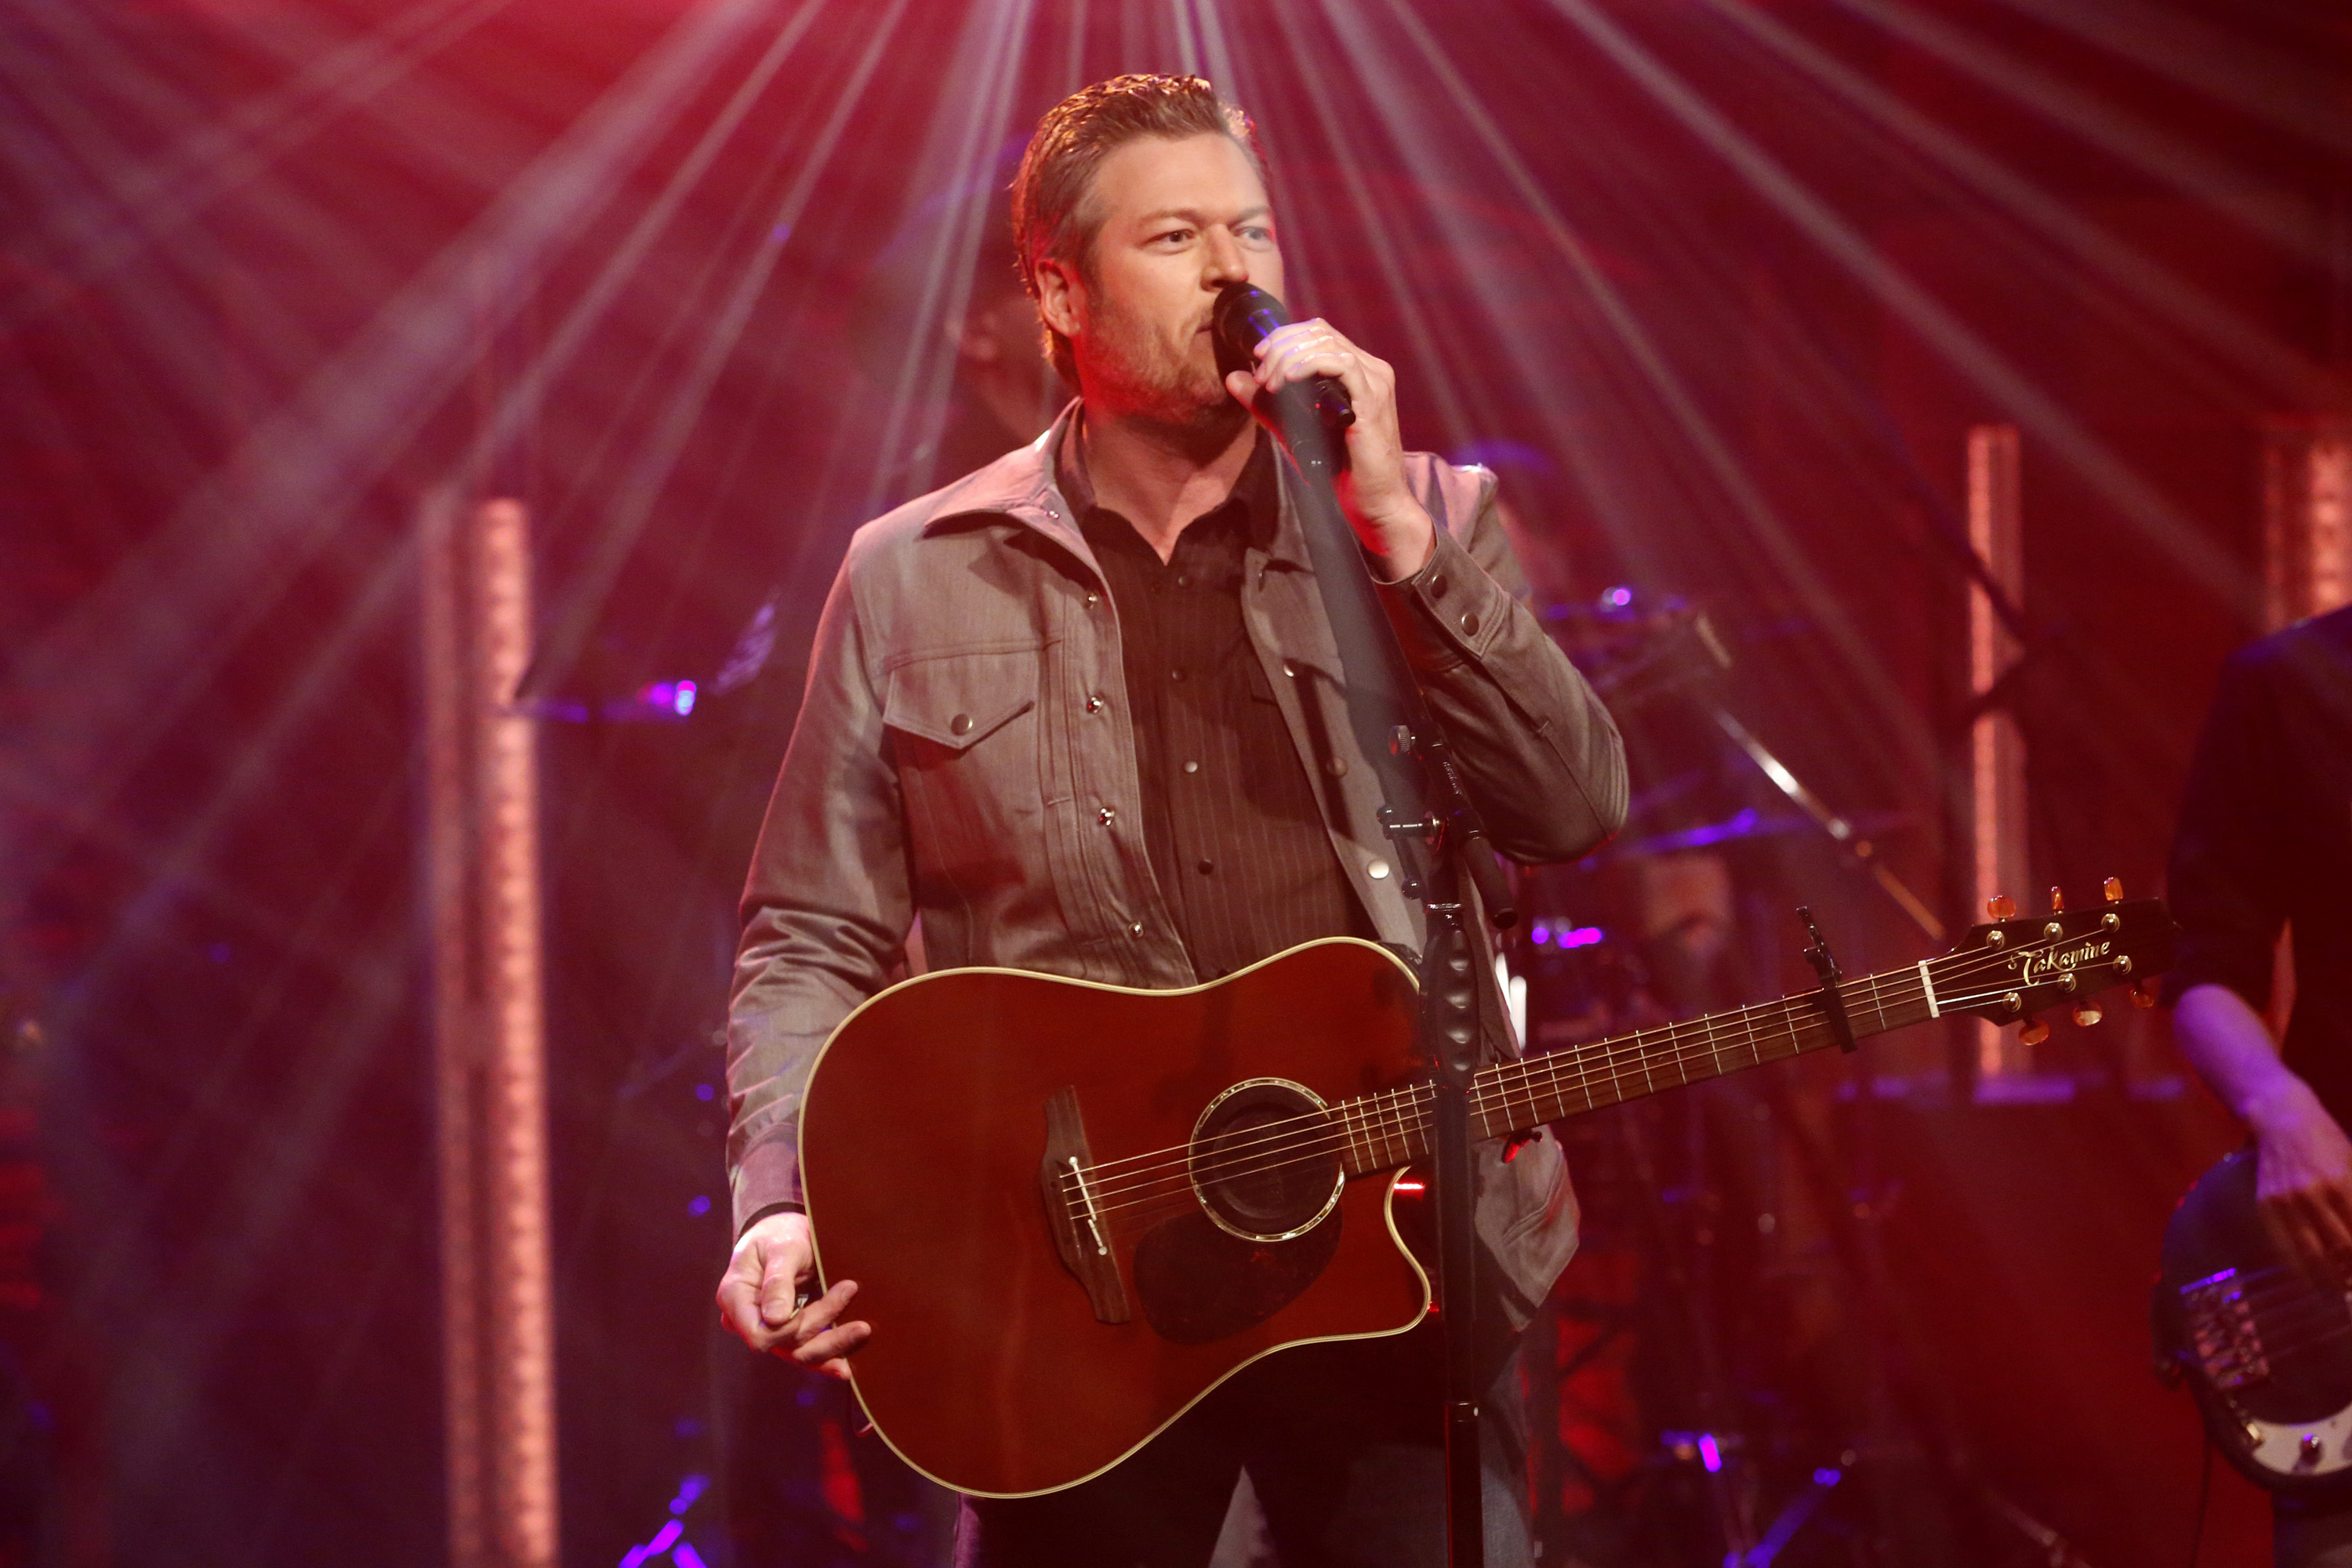 LATE NIGHT WITH SETH MEYERS -- Episode 663 -- Pictured: Musical guest Blake Shelton performs on March 20, 2018 -- (Photo by: Lloyd Bishop/NBC/NBCU Photo Bank via Getty Images) (NBC&mdash;NBCU Photo Bank via Getty Images)